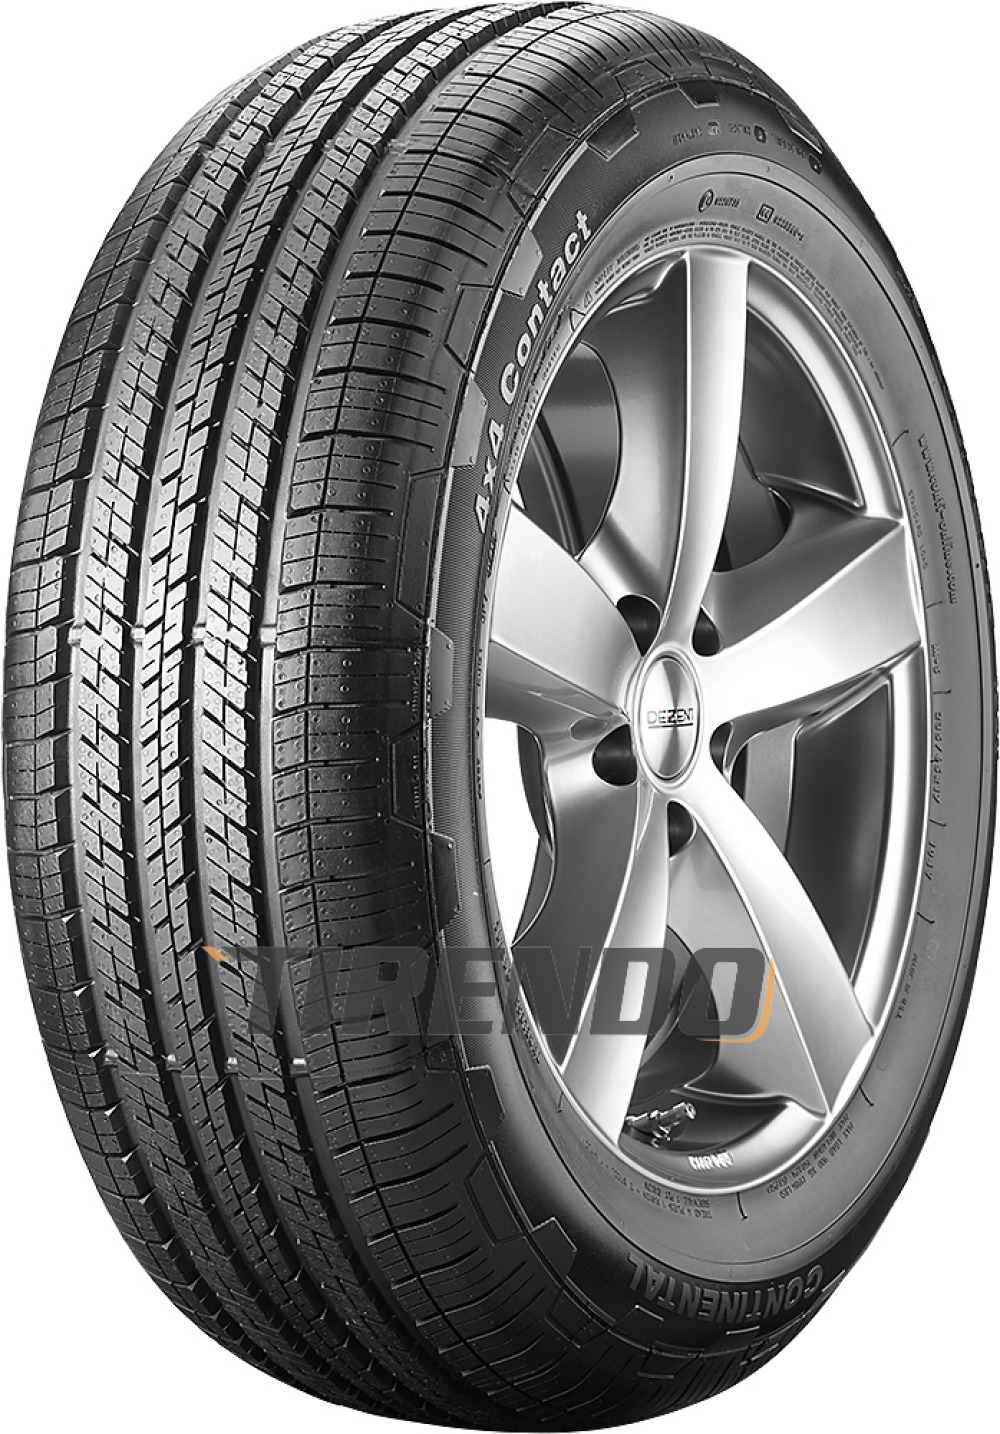 Image of        Continental 4X4 Contact ( 235/70 R17 111H XL )